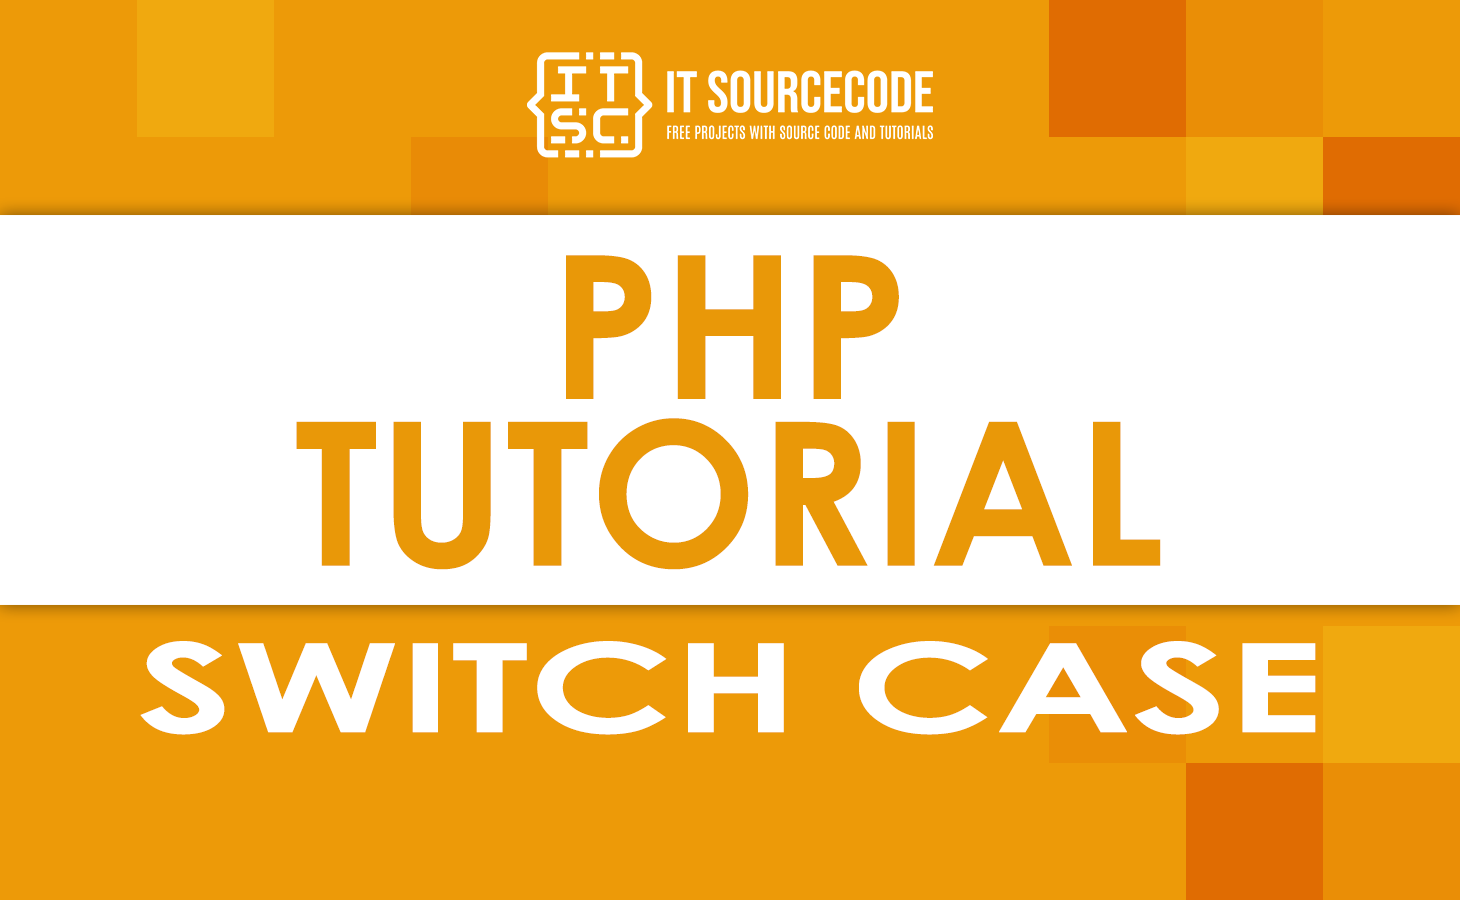 PHP Switch Case Statement With Examples